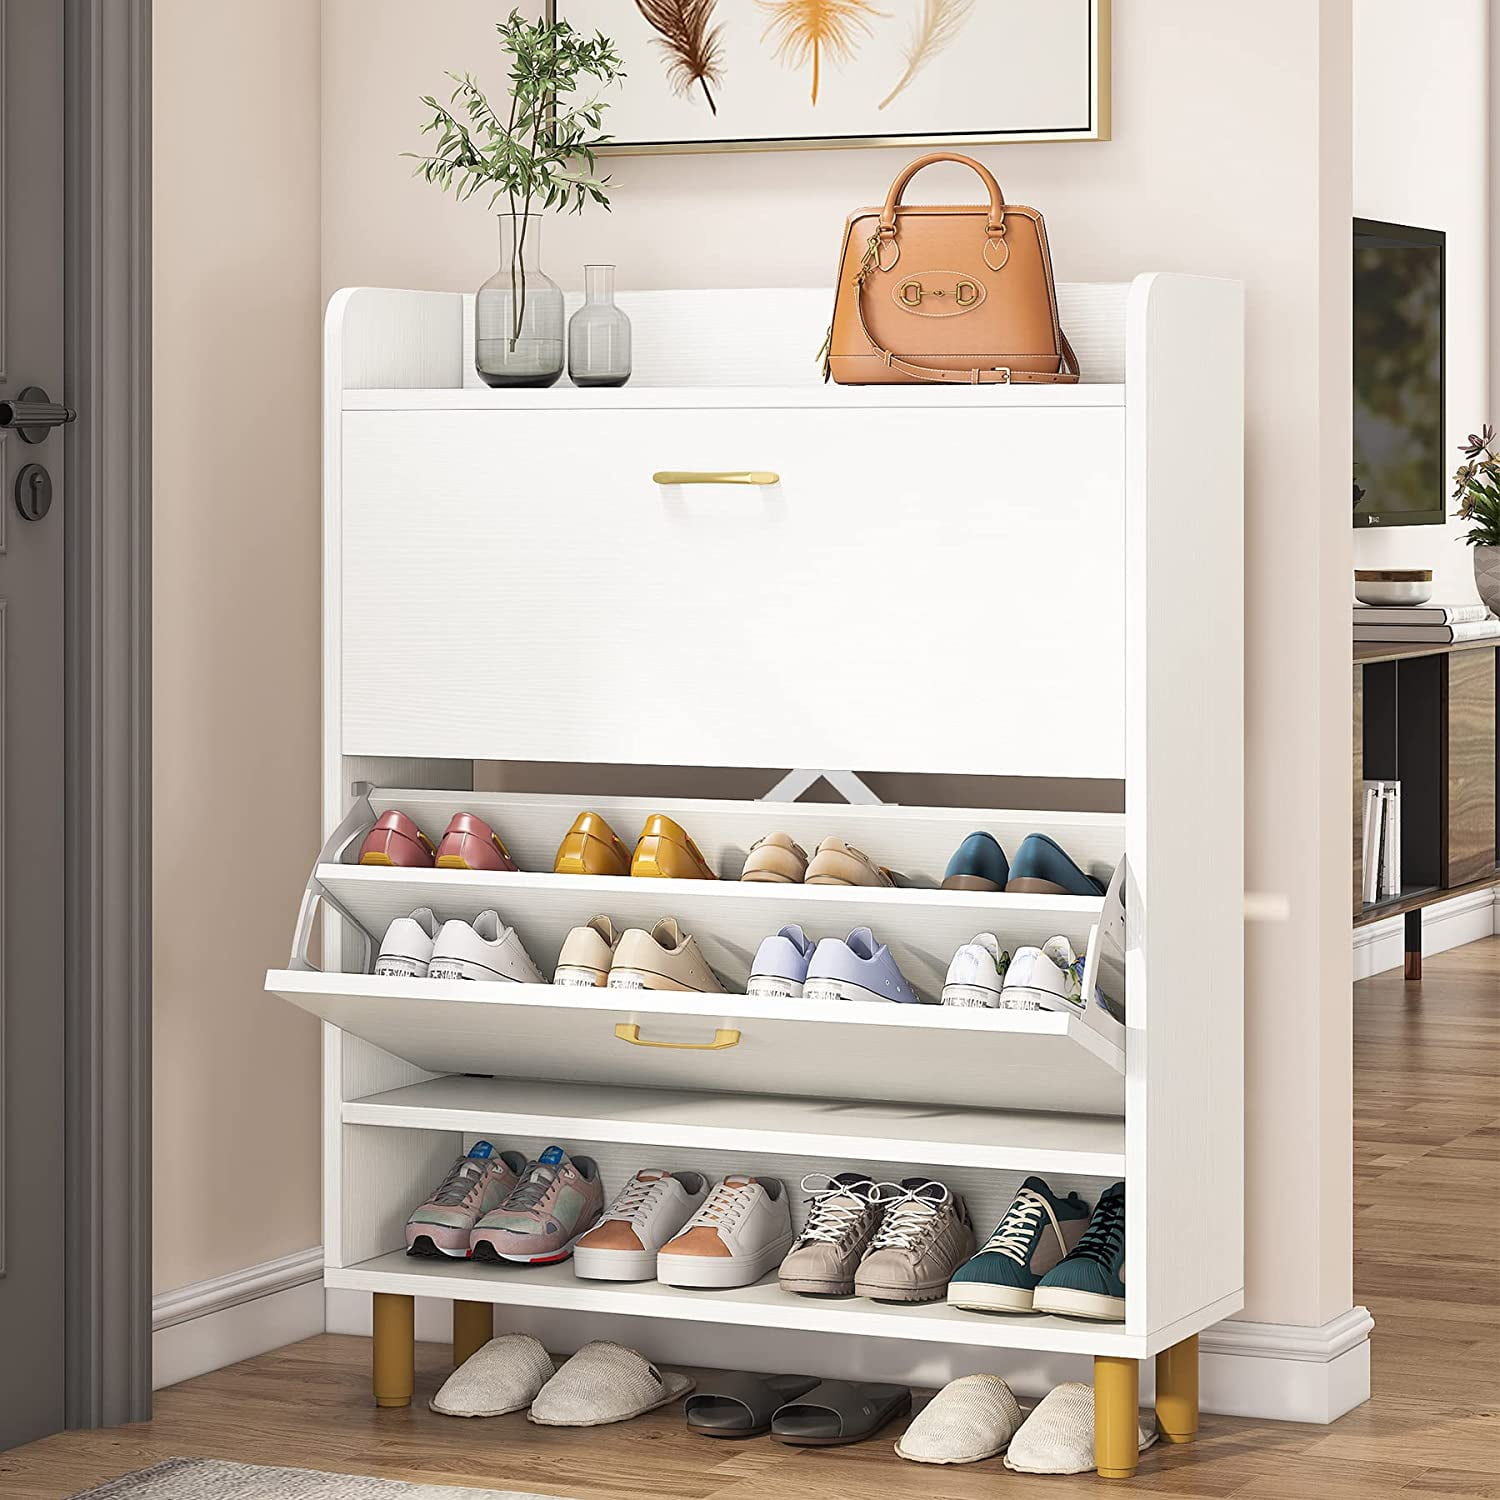 Buy Willow Shoe Storage Cabinet with Frosty White Door Exotic Teak Finish  Online in India at Best Price  Modern Shoe Racks  Living Cabinets   Living Room Furniture  Furniture  Wooden Street Product